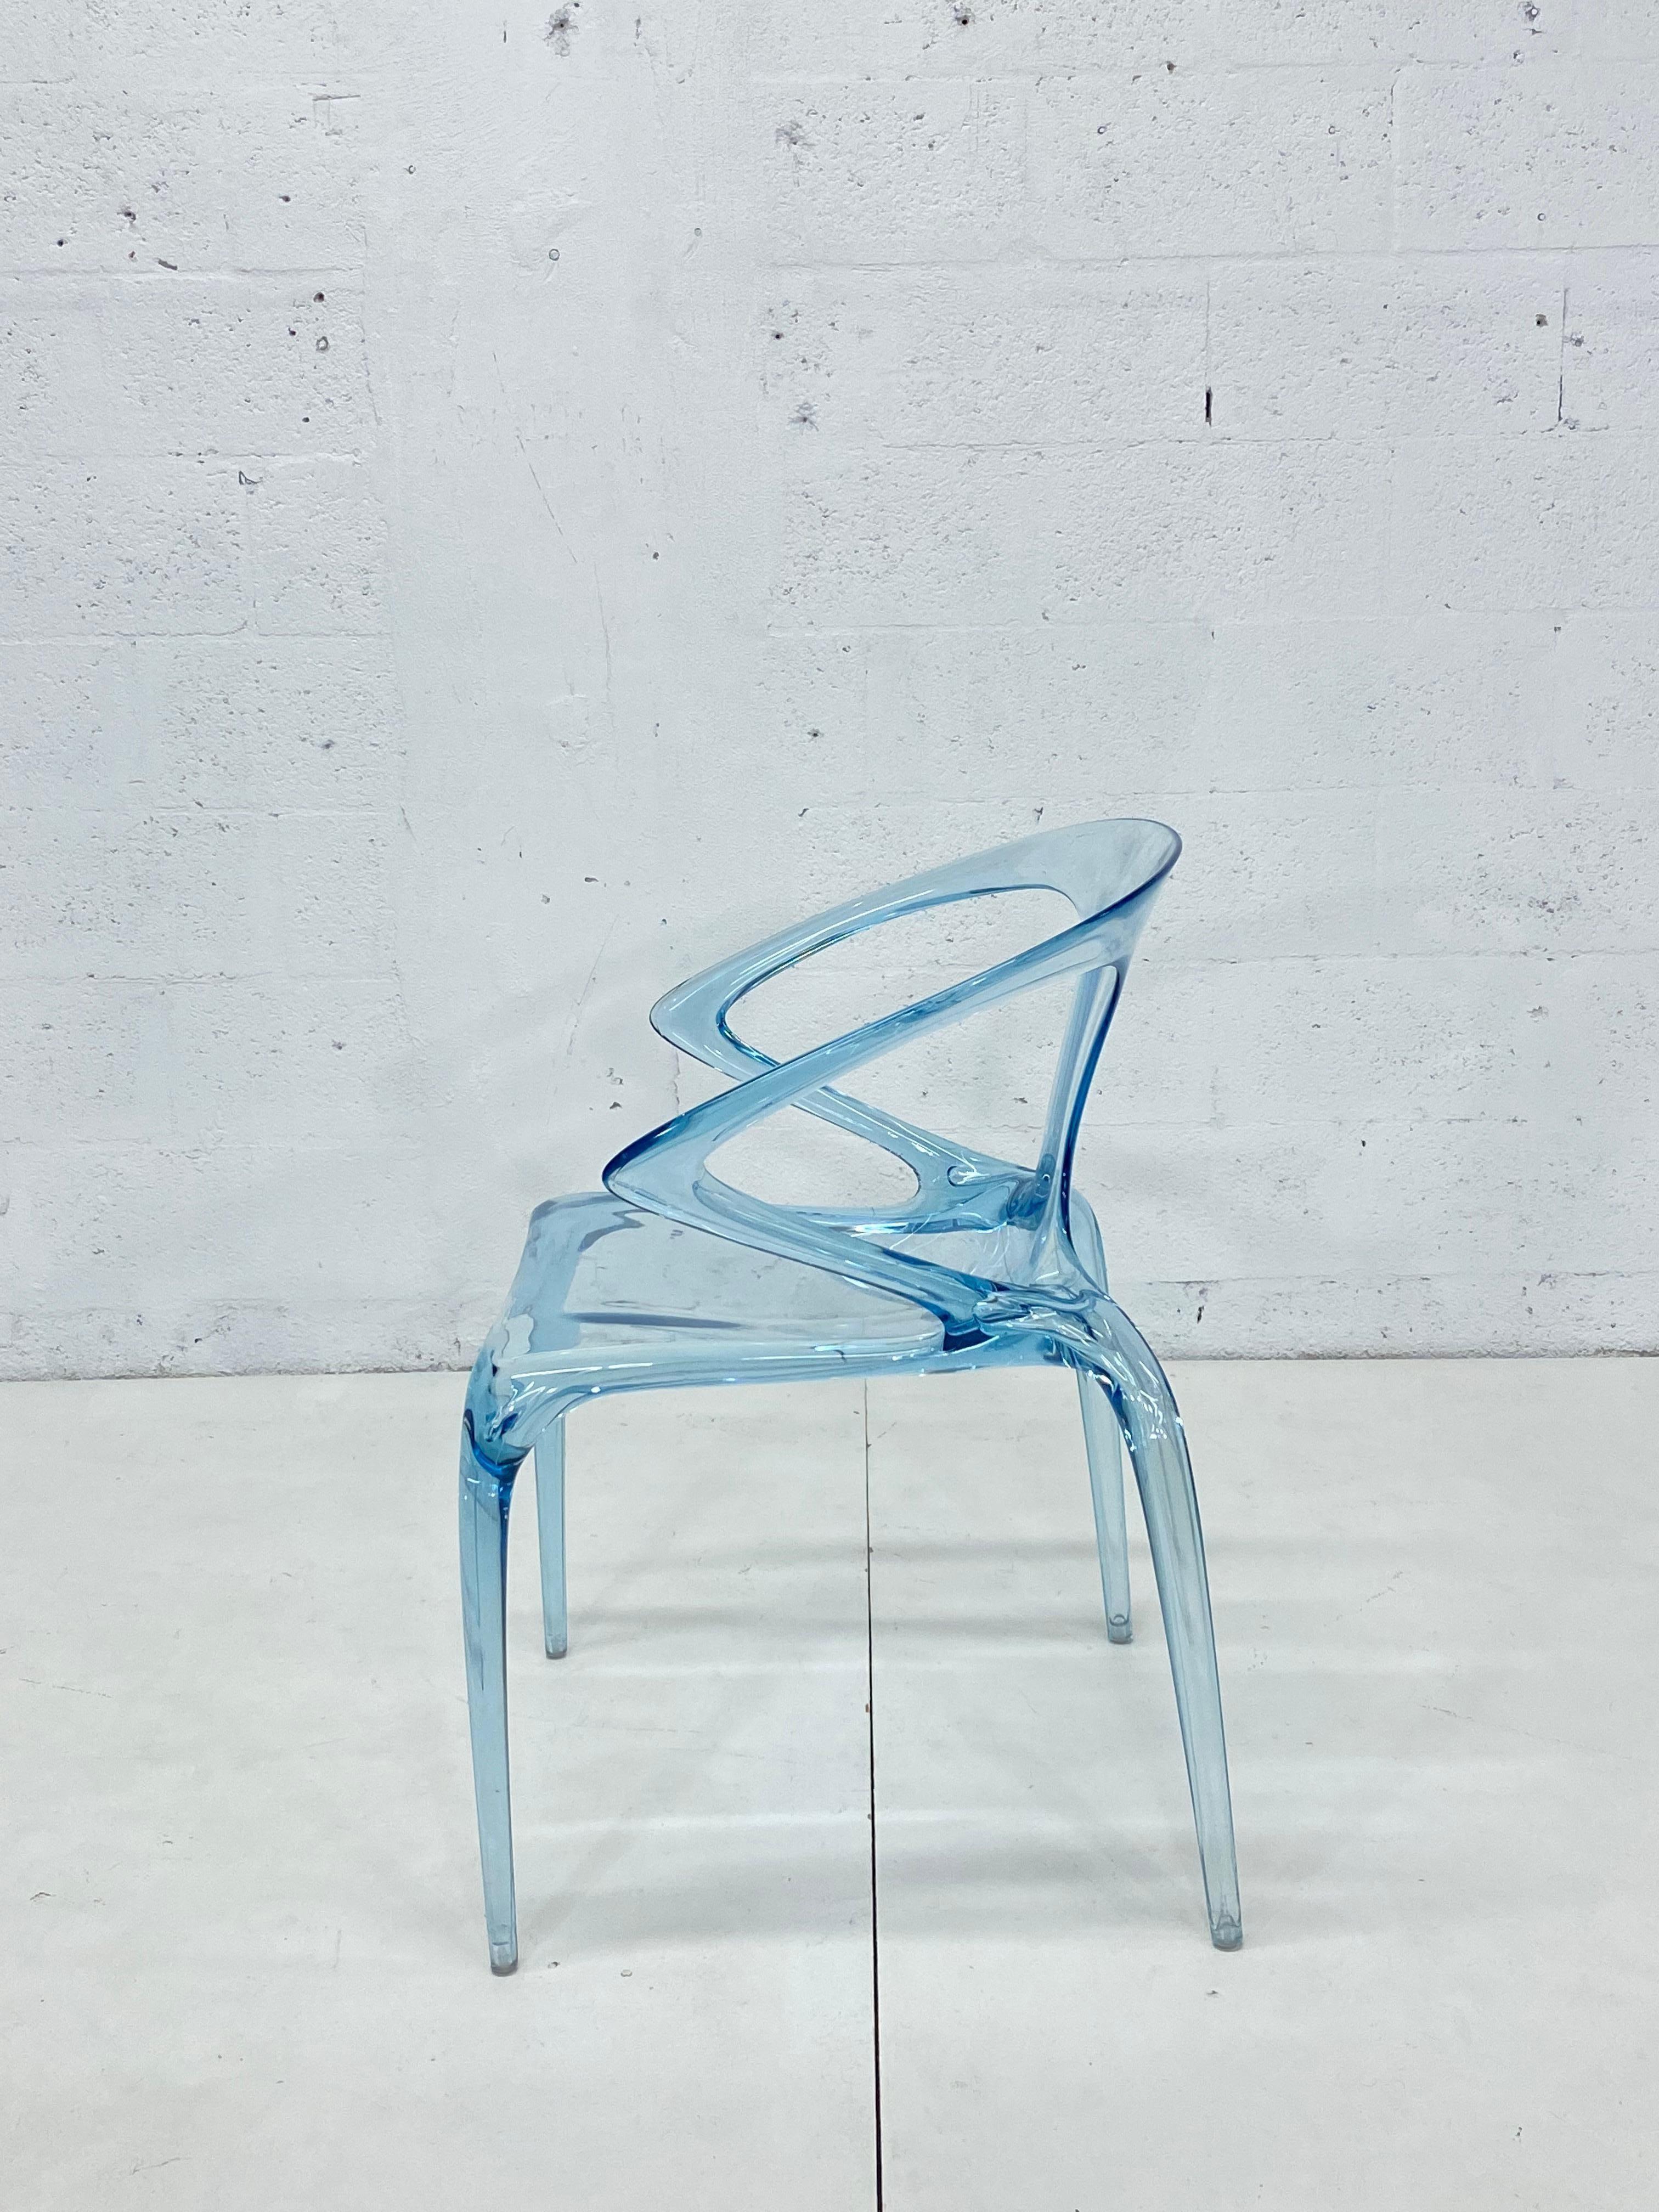 Four polycarbonate ciel Roche Bobois AVA Bridge chairs designed by Song Wen Zhong for Roche Bobois.


The AVA chair was created by Song Wen Zhong, a young Chinese designer and recipient of the Roche Bobois Design Award on the theme of “Nature, a